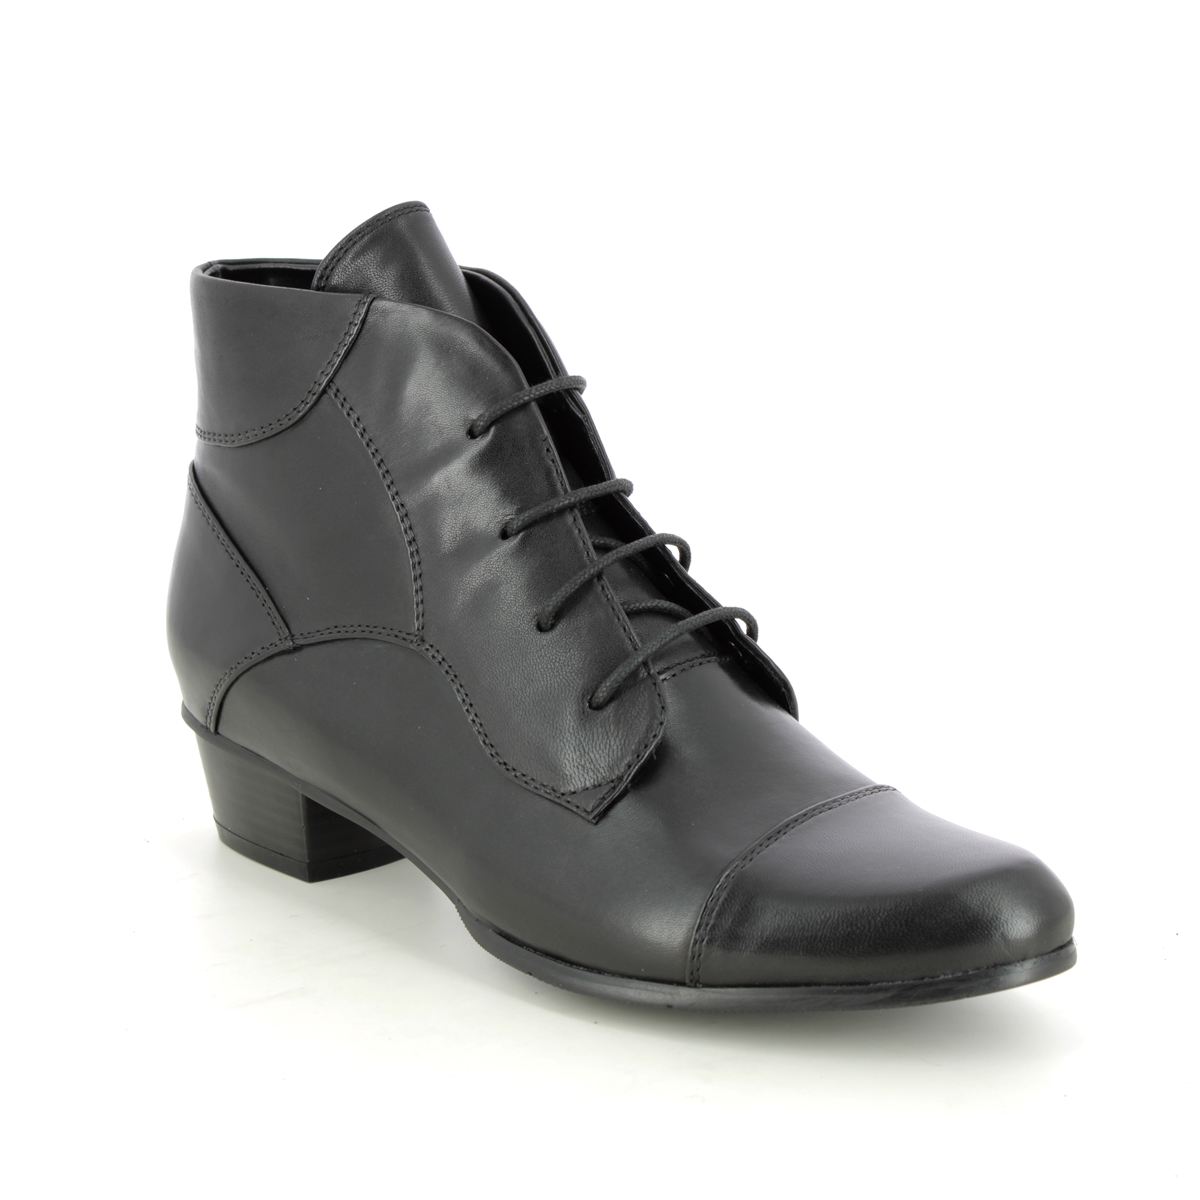 Regarde le Ciel Stefany 123 Lace Black leather Womens Lace Up Boots 0123-003 in a Plain Leather in Size 39